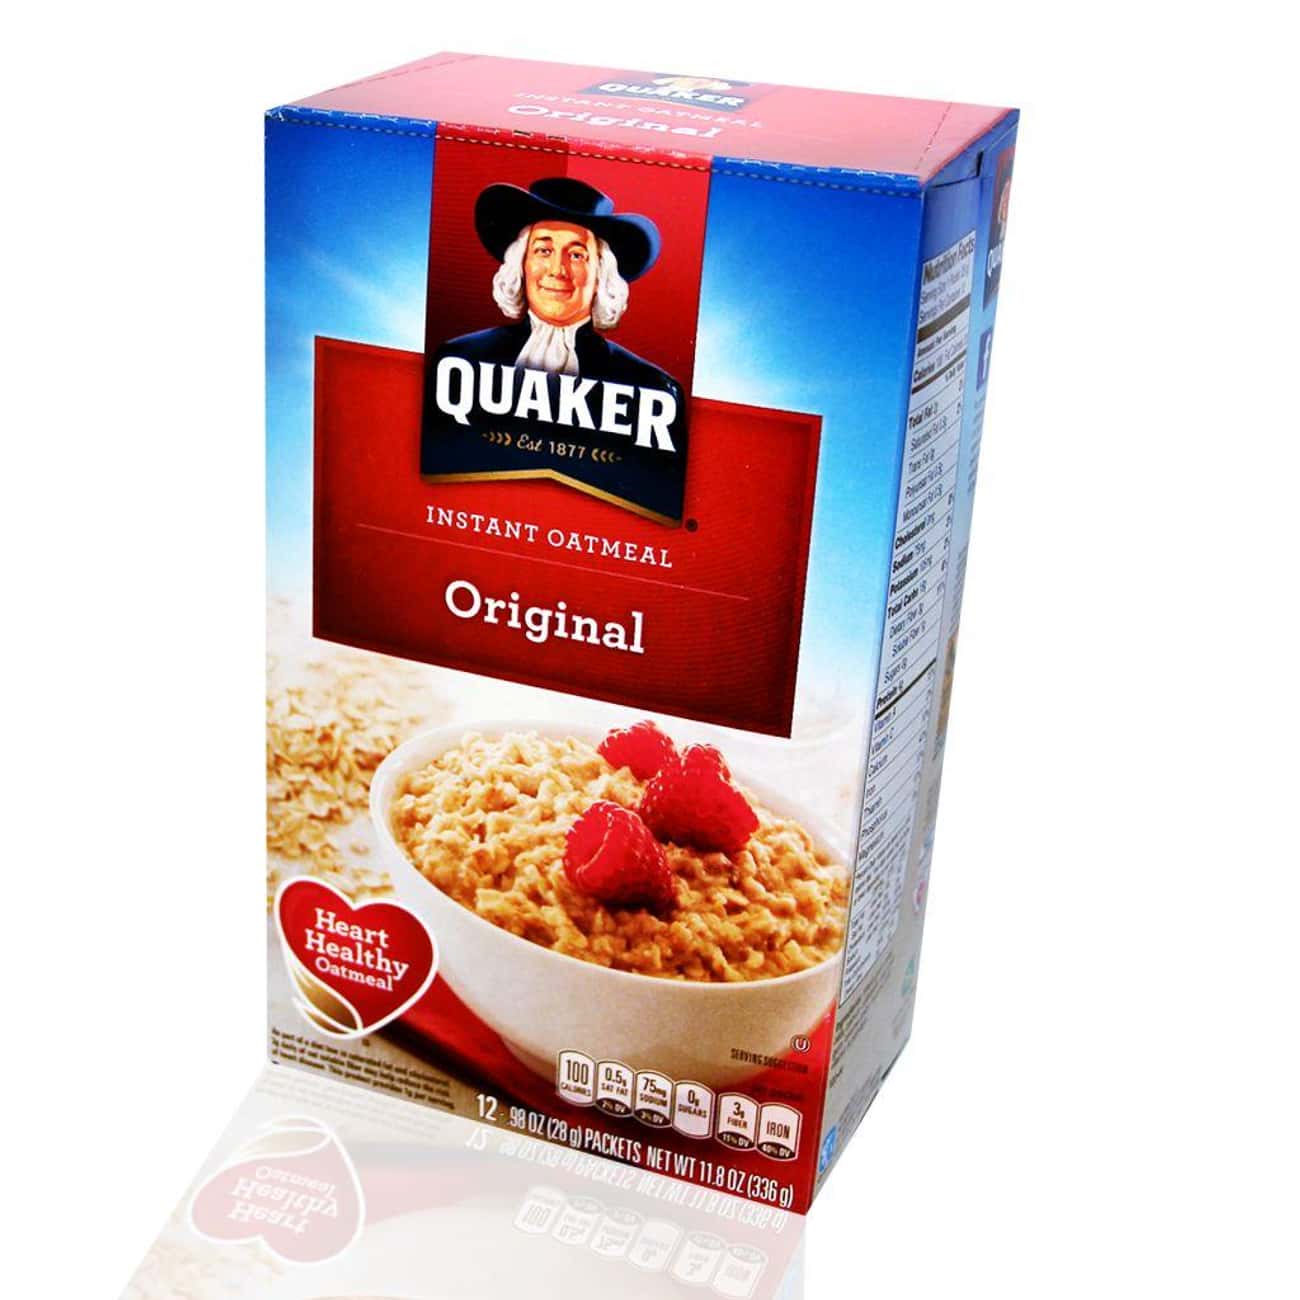 The Strawberries in Quaker Instant Are Really Just Apples